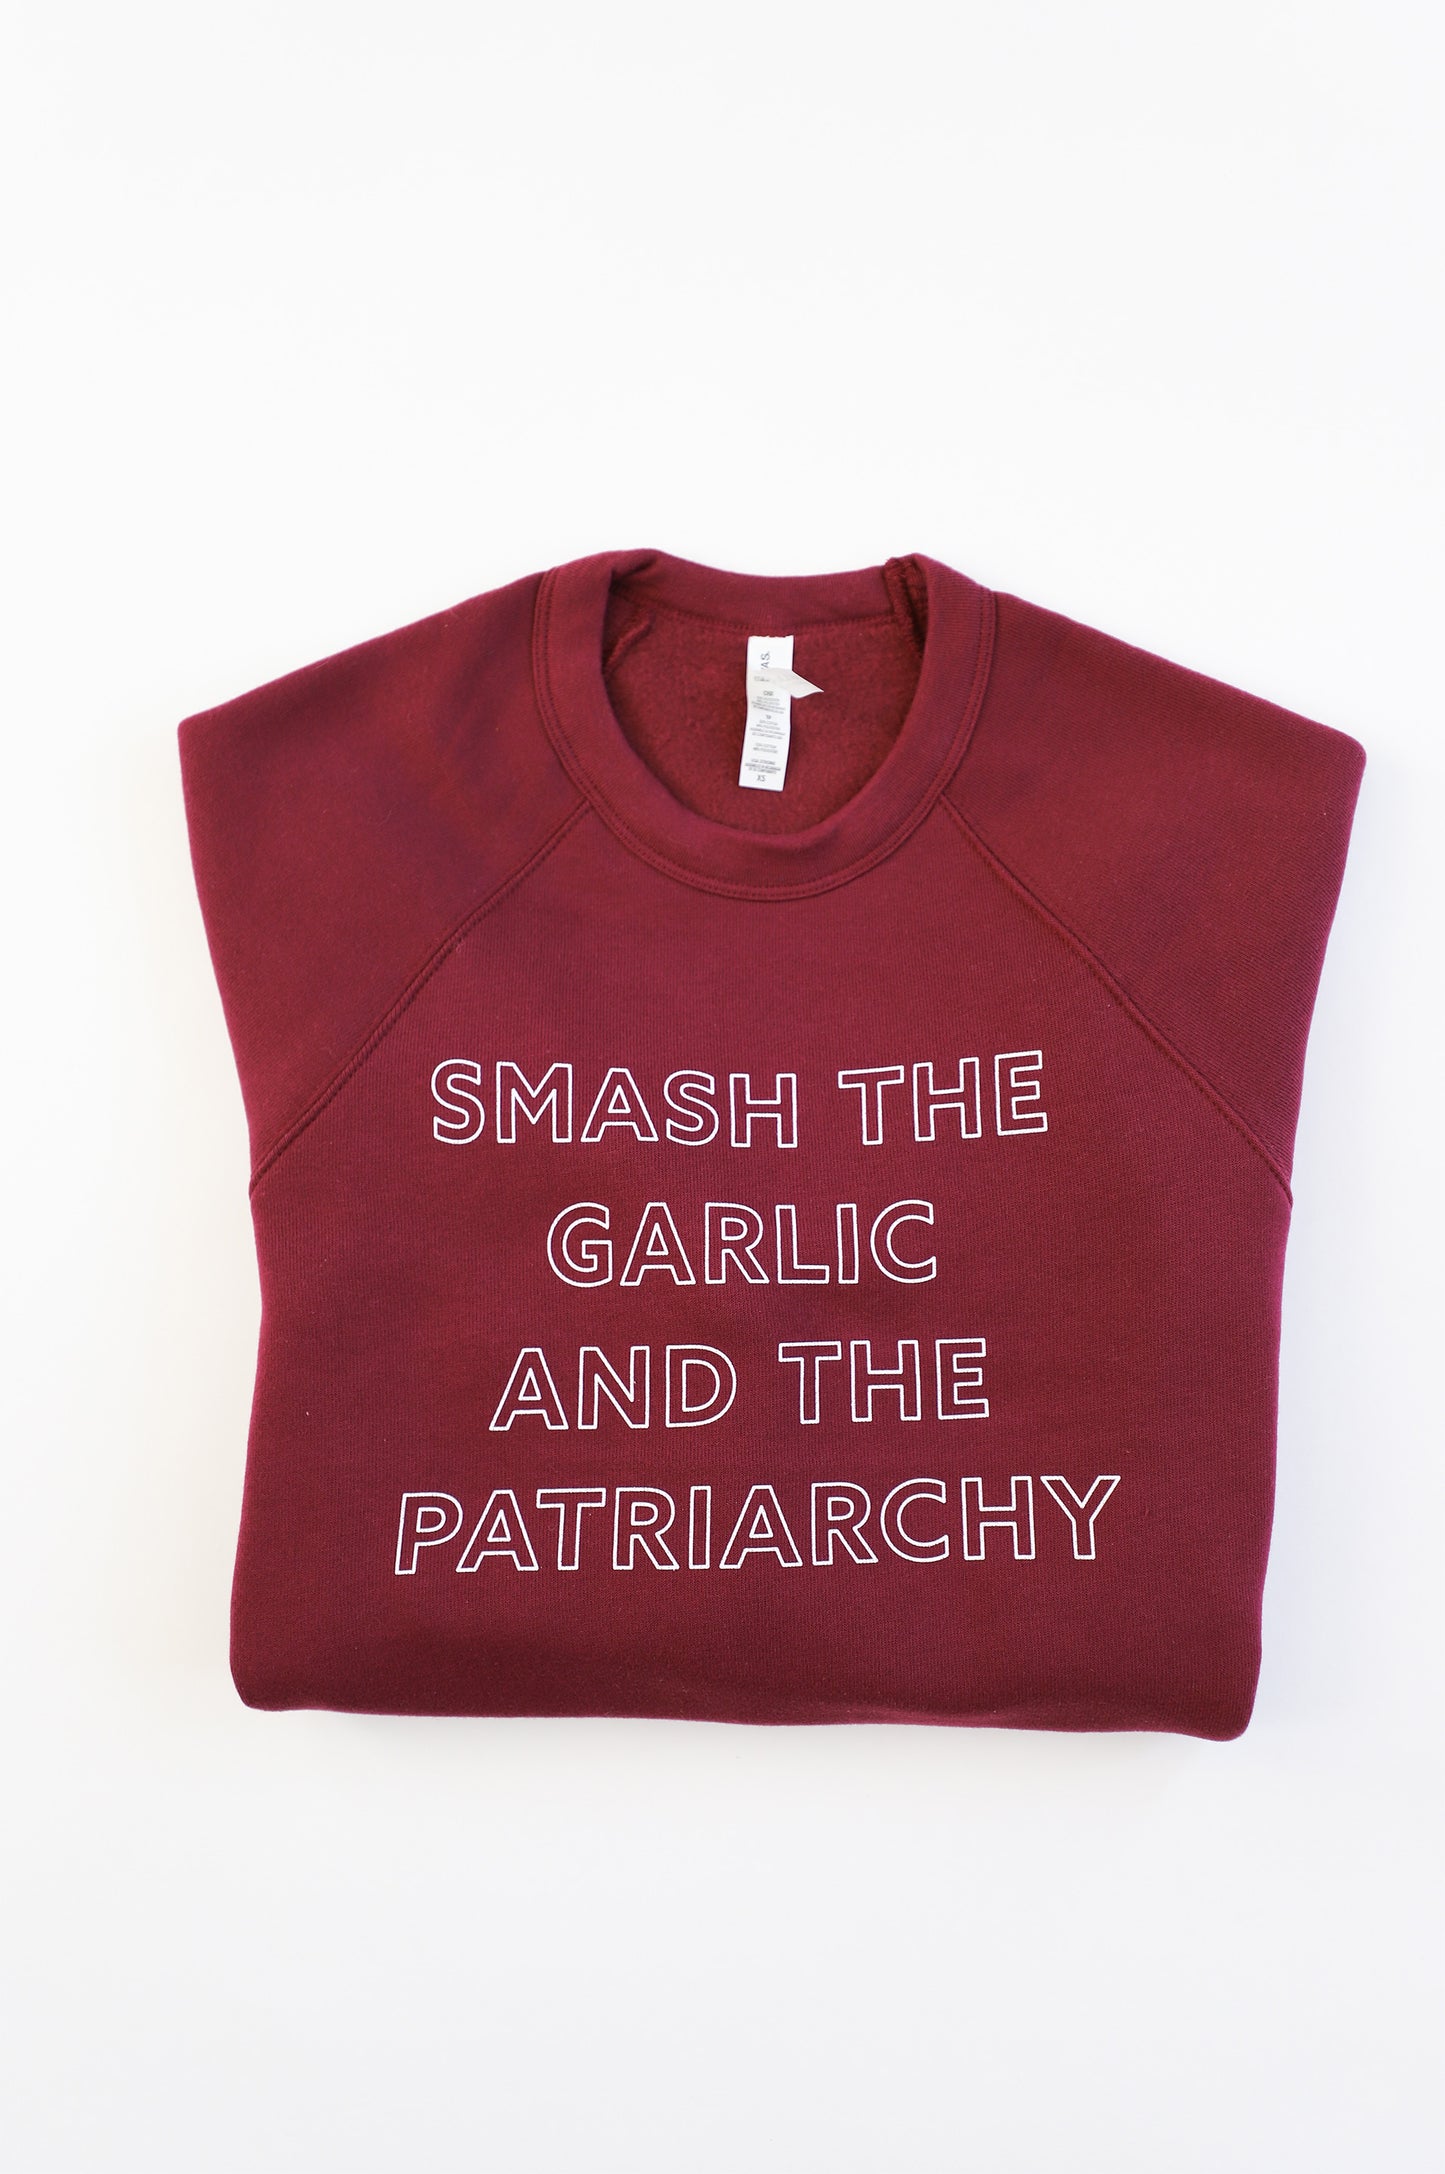 A maroon crewneck reads "Smash the Garlic and the Patriarchy" in white block letters